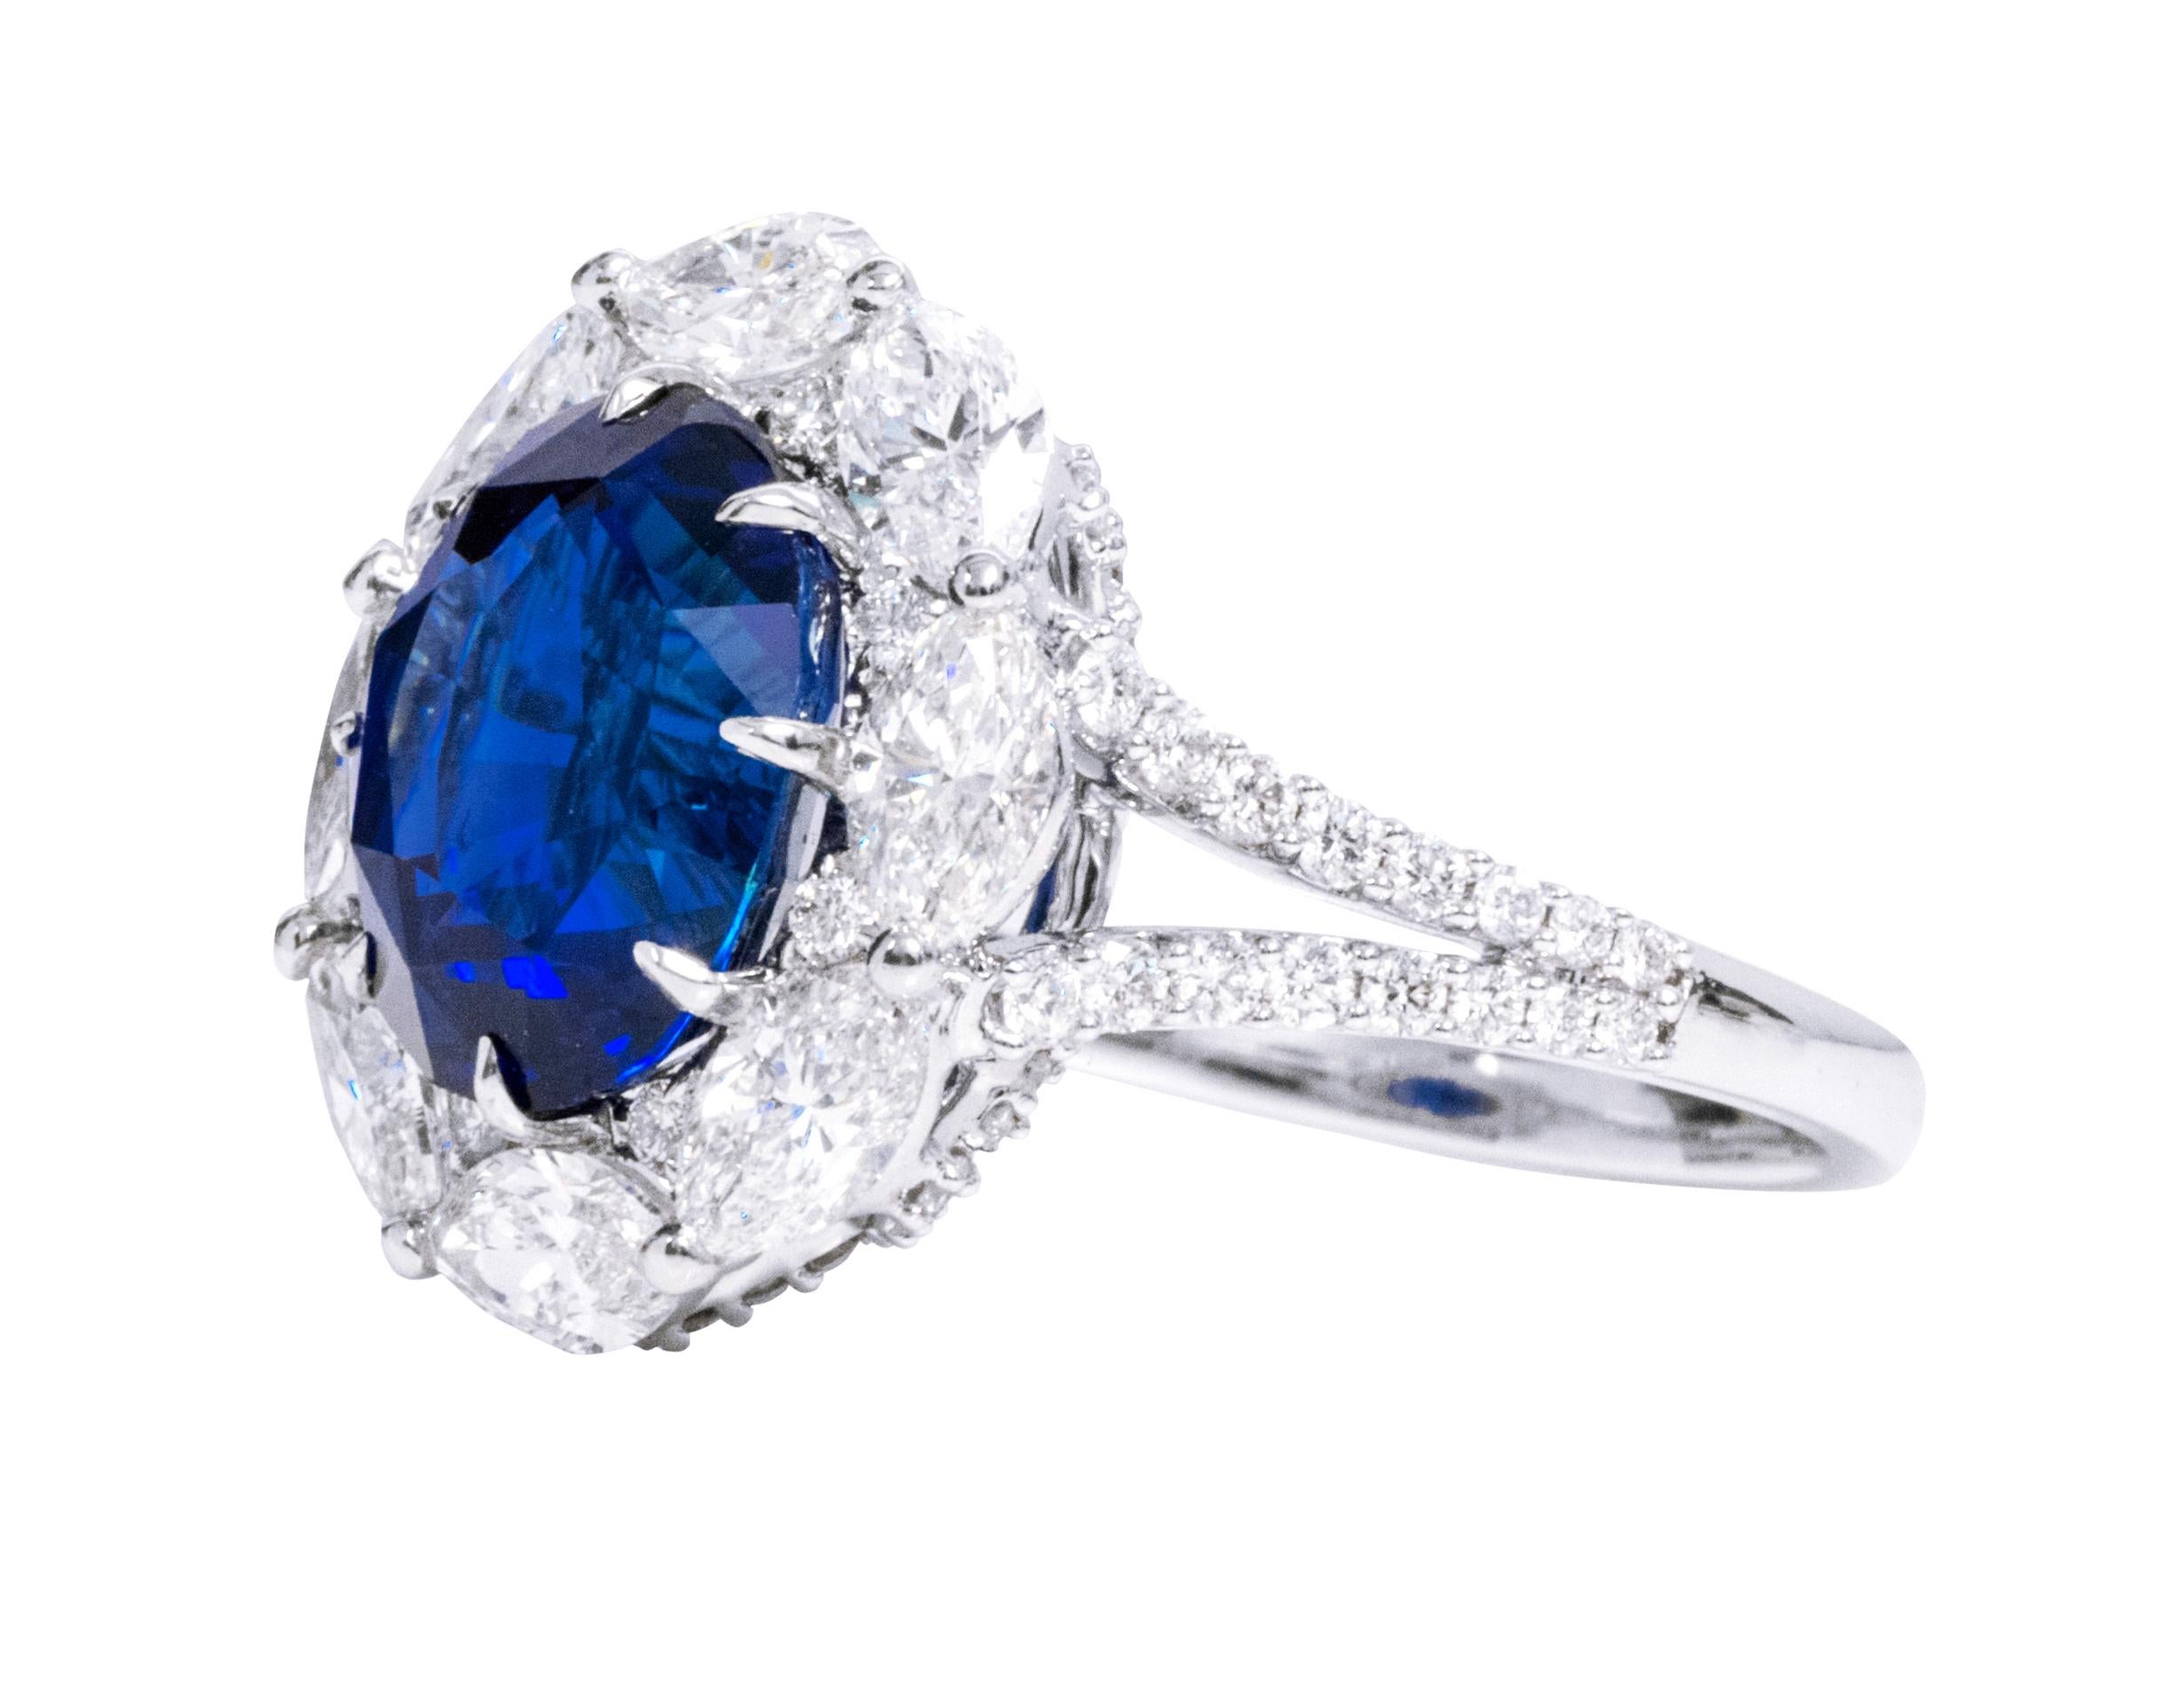 GIA Certified 6.29 Carat Royal Blue Sapphire and Diamond Cocktail Ring

This ring is a sparkling treat to the eyes and the heart. Each adornment of this classic ring is bestowed with a superior finish and organic silhouette. Its design is timeless,